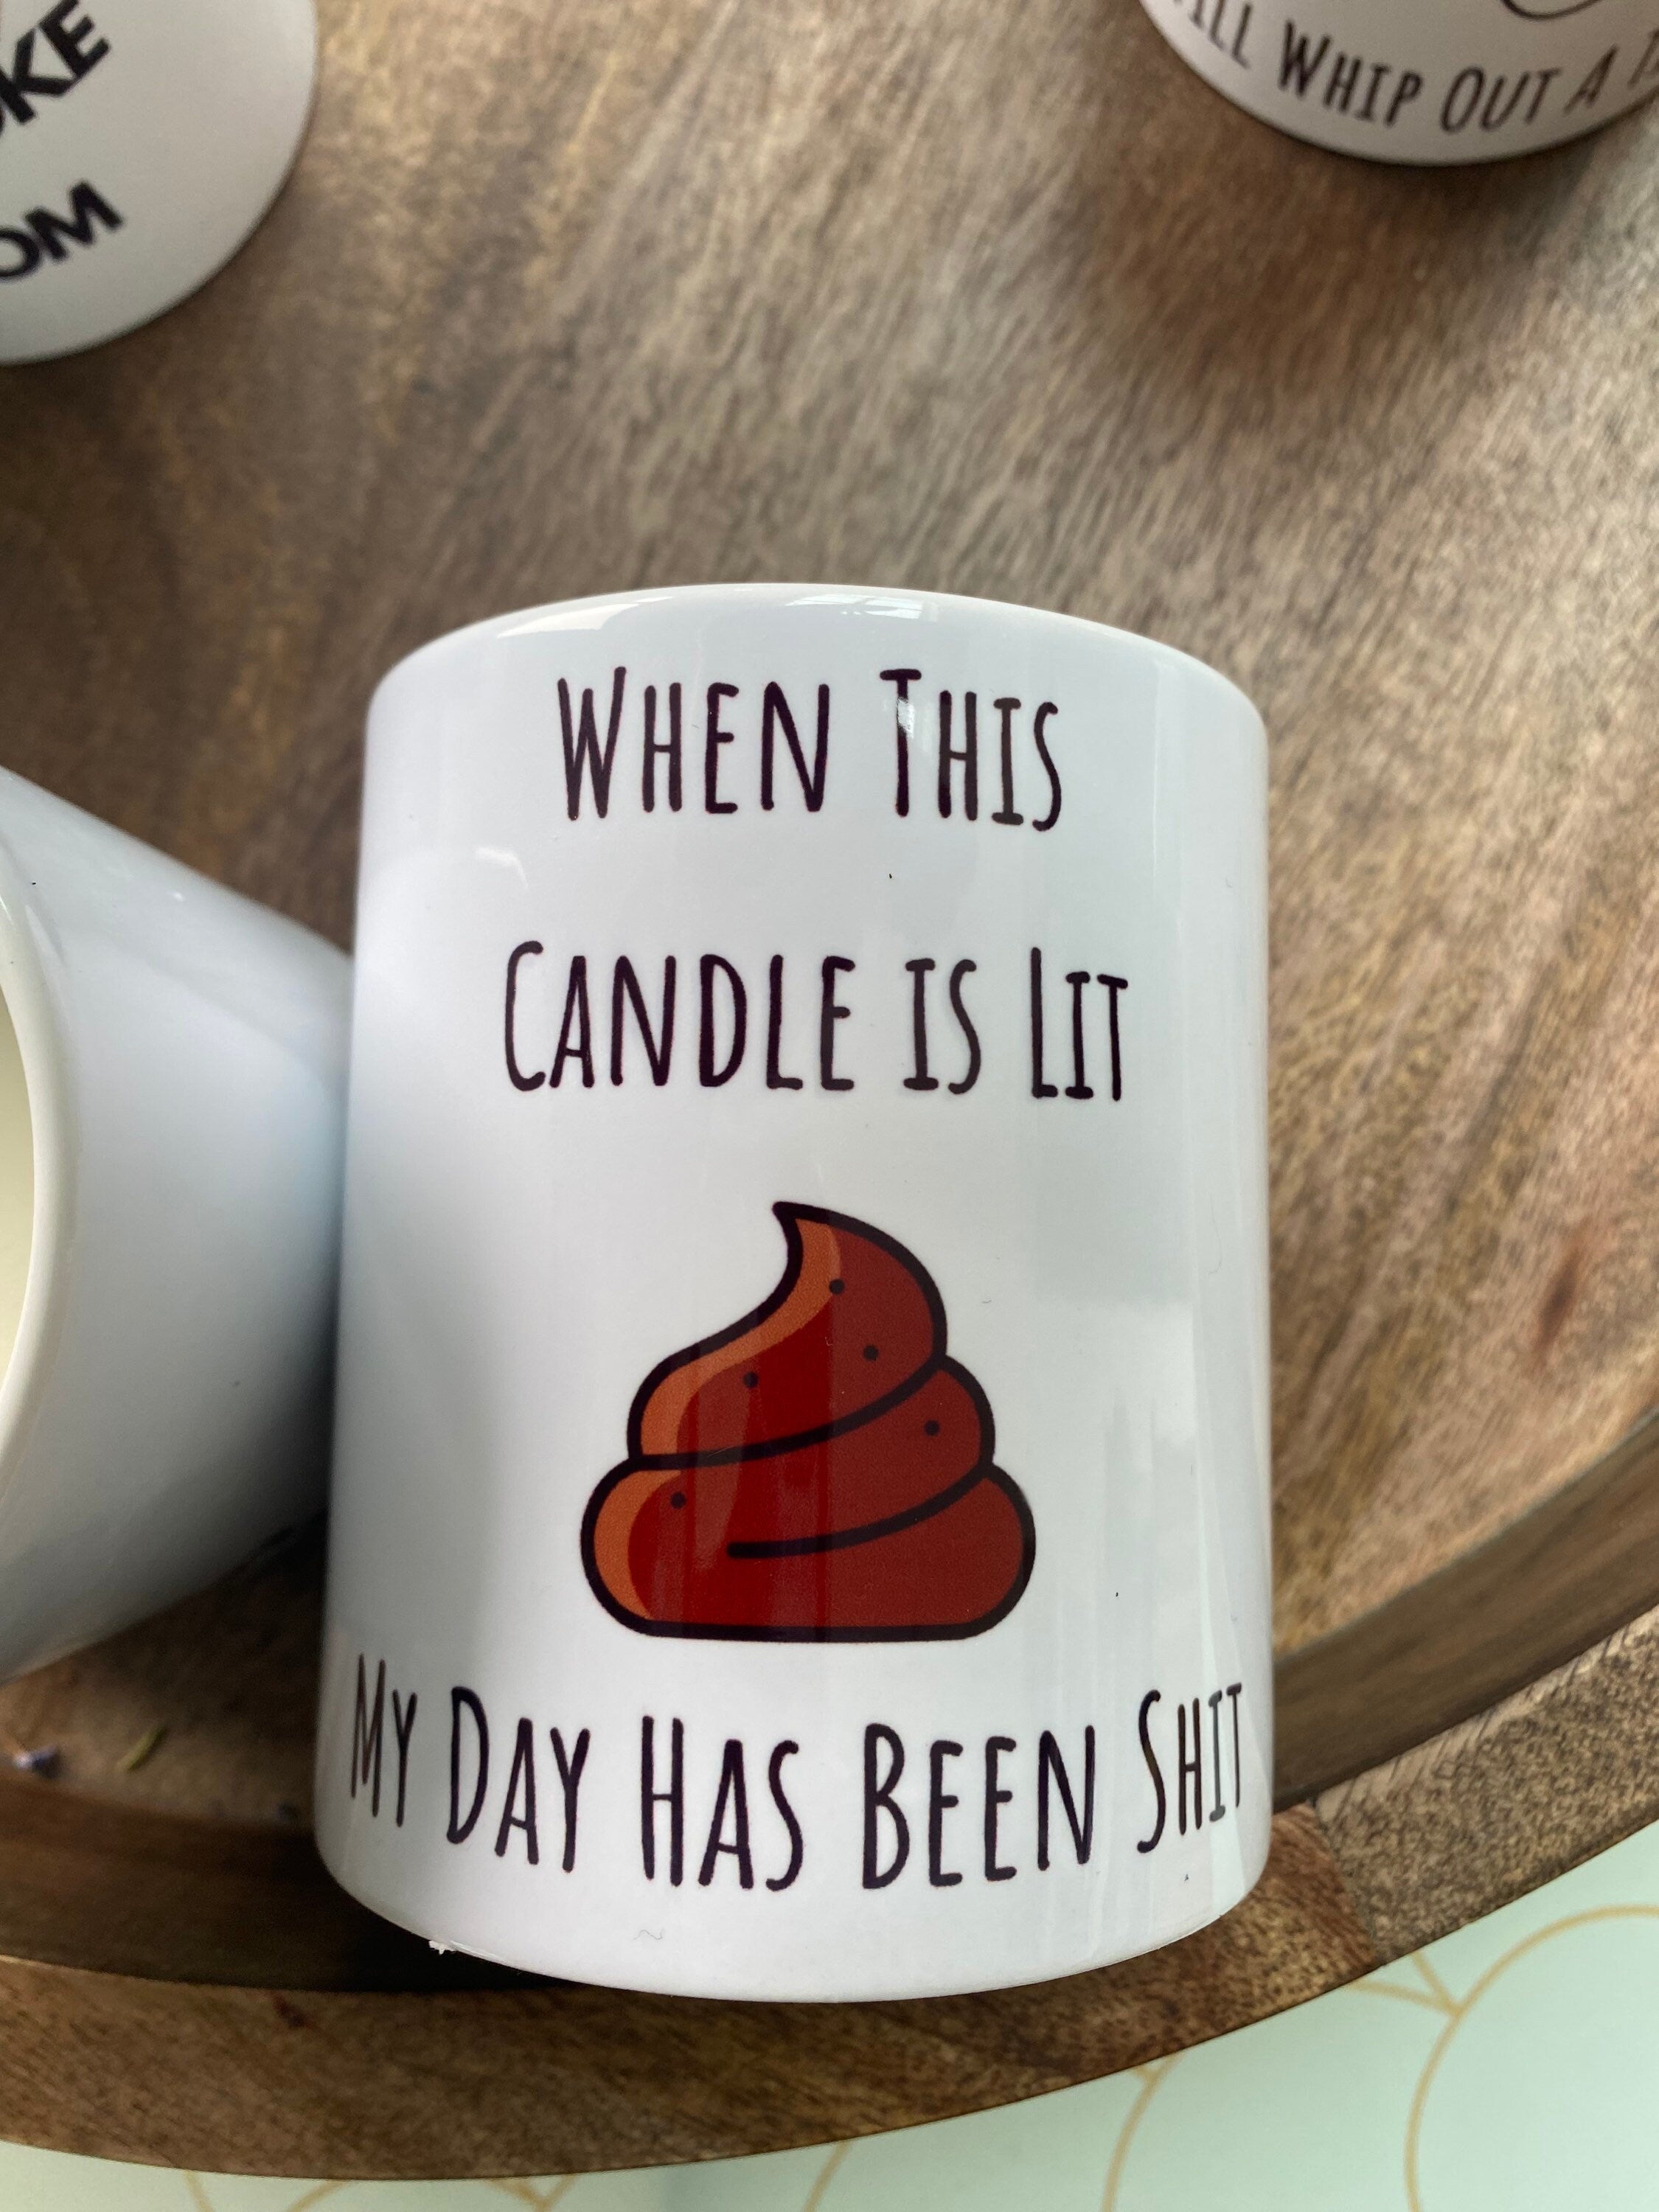 When this candle is lit my day has been shit funny candle